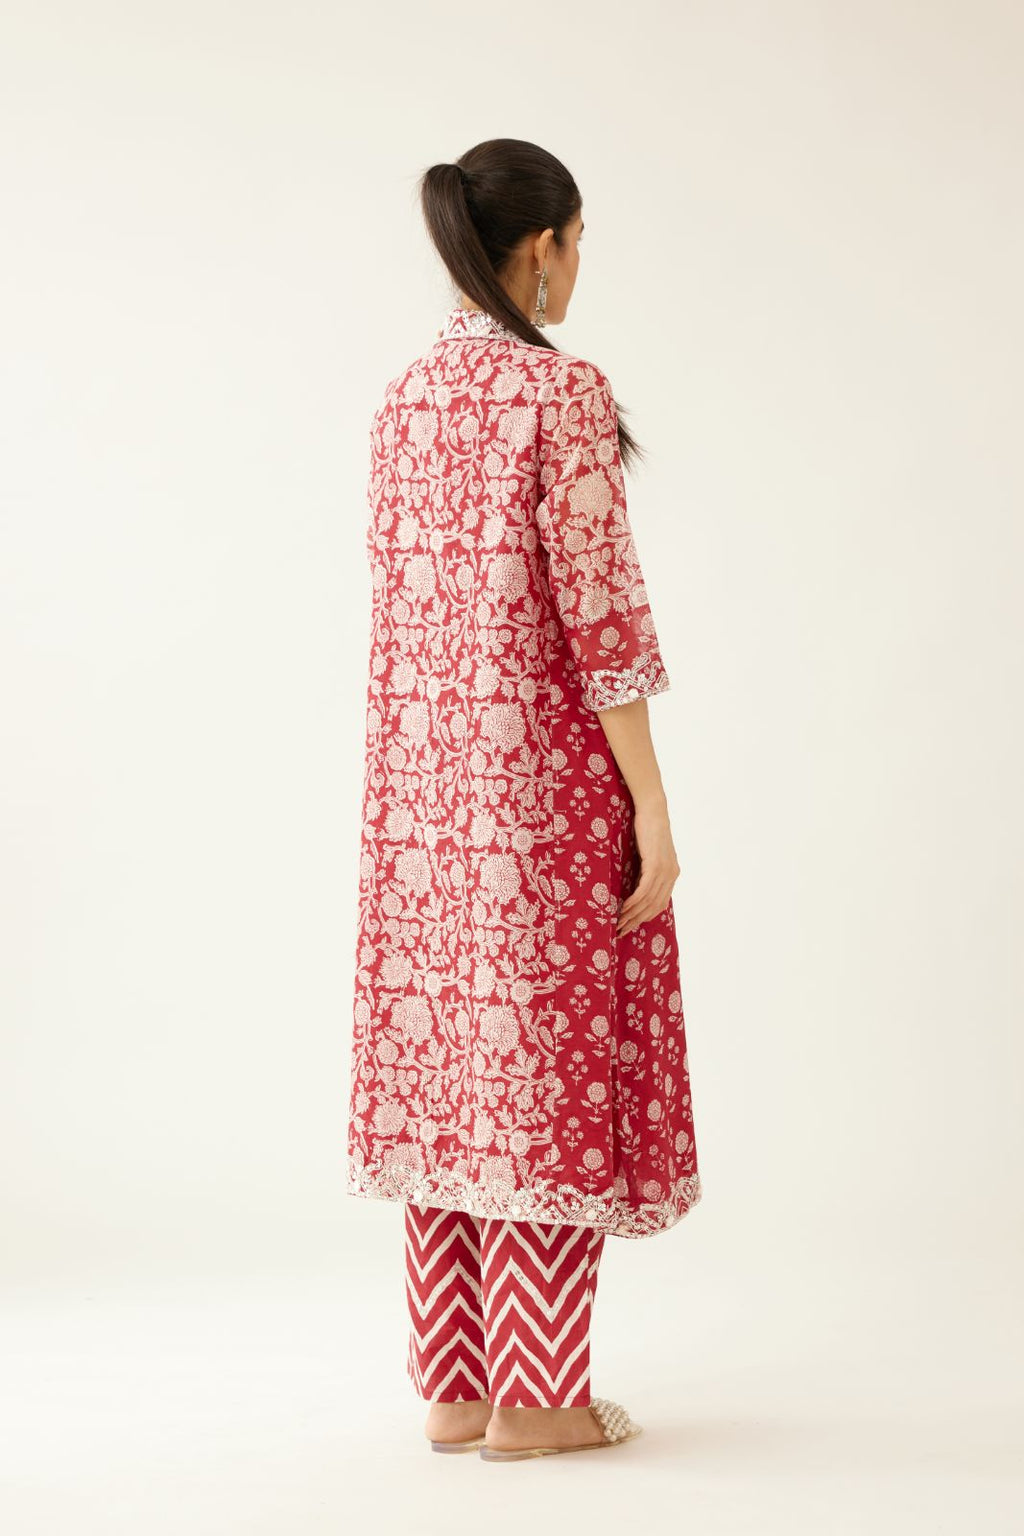 Red hand block printed A-line short kurta with sequins, tassels and bead work, paired with red & off white cotton hand block printed straight pants detailed with sequin and bead work at hem.